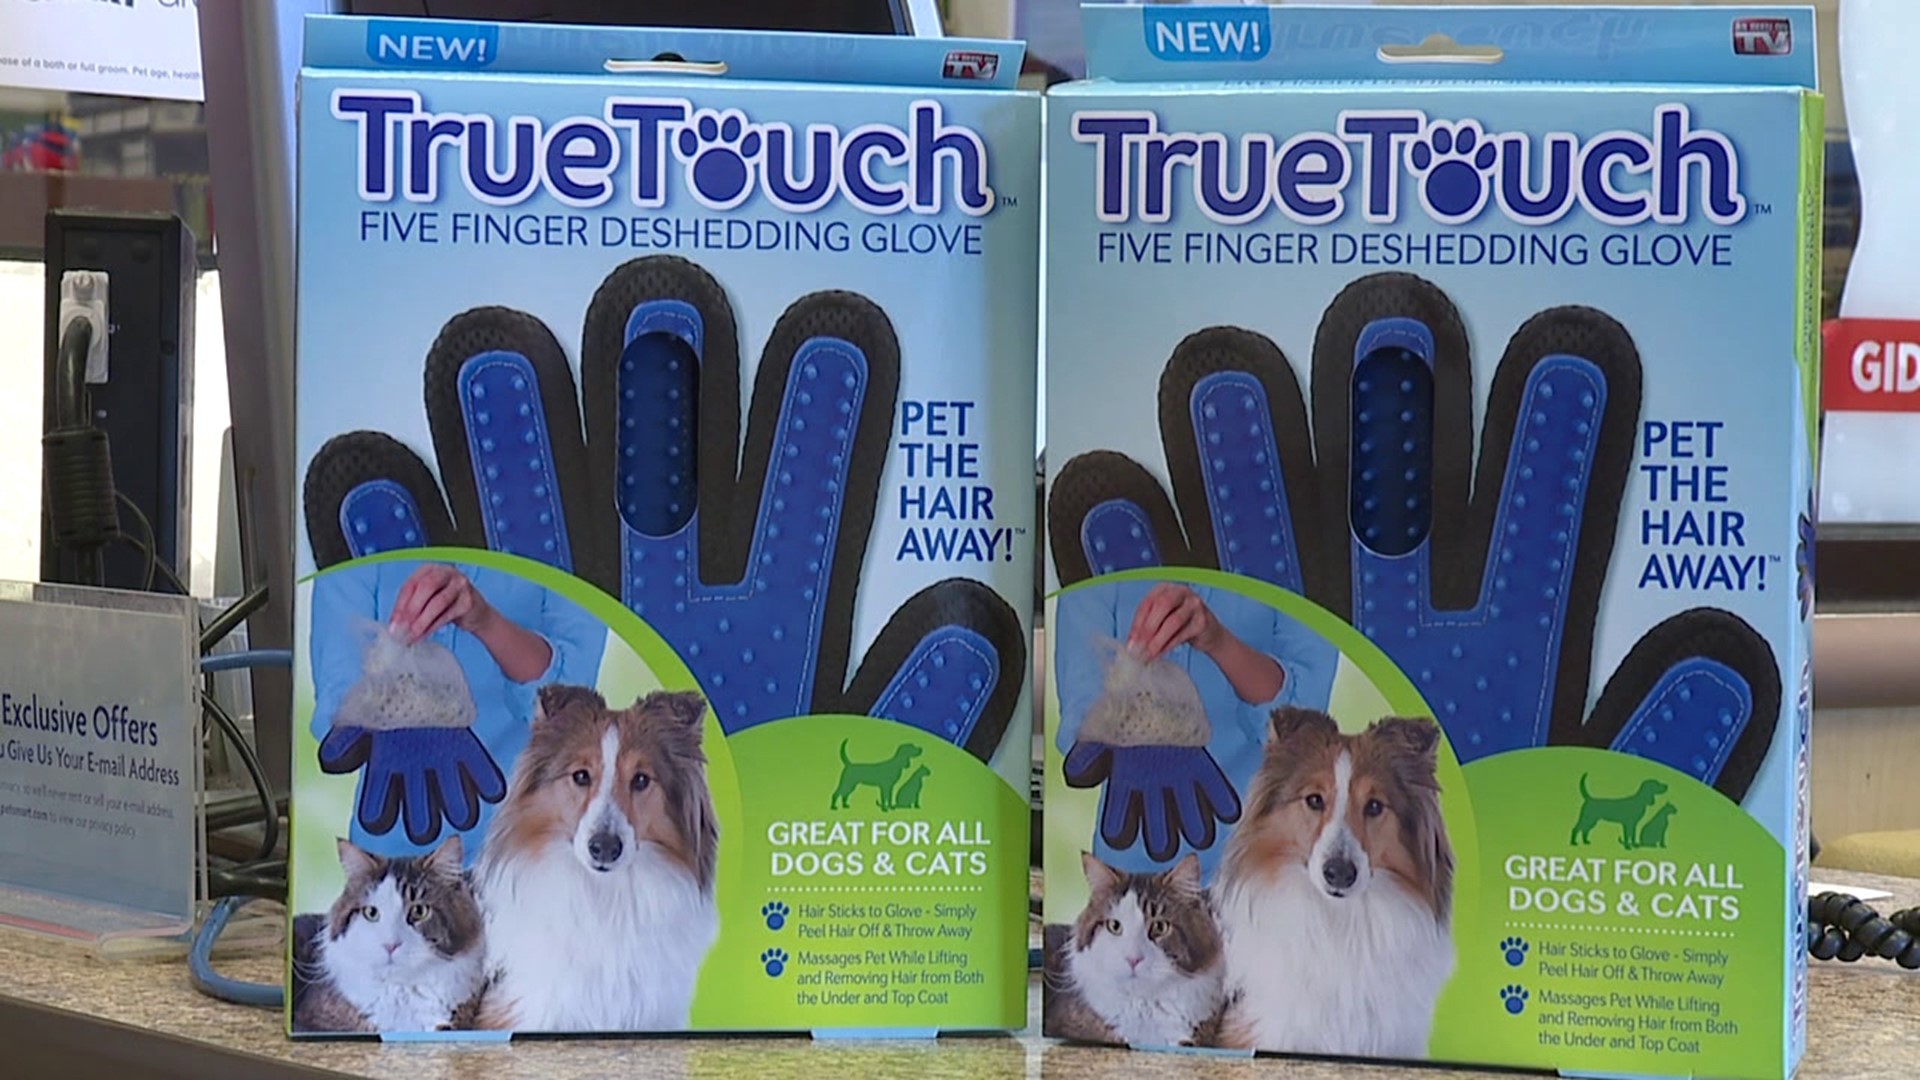 TrueTouch is a 2-sided grooming glove. The maker claims this glove will save you lots of time and money, keeping your pet from shedding all over the house.